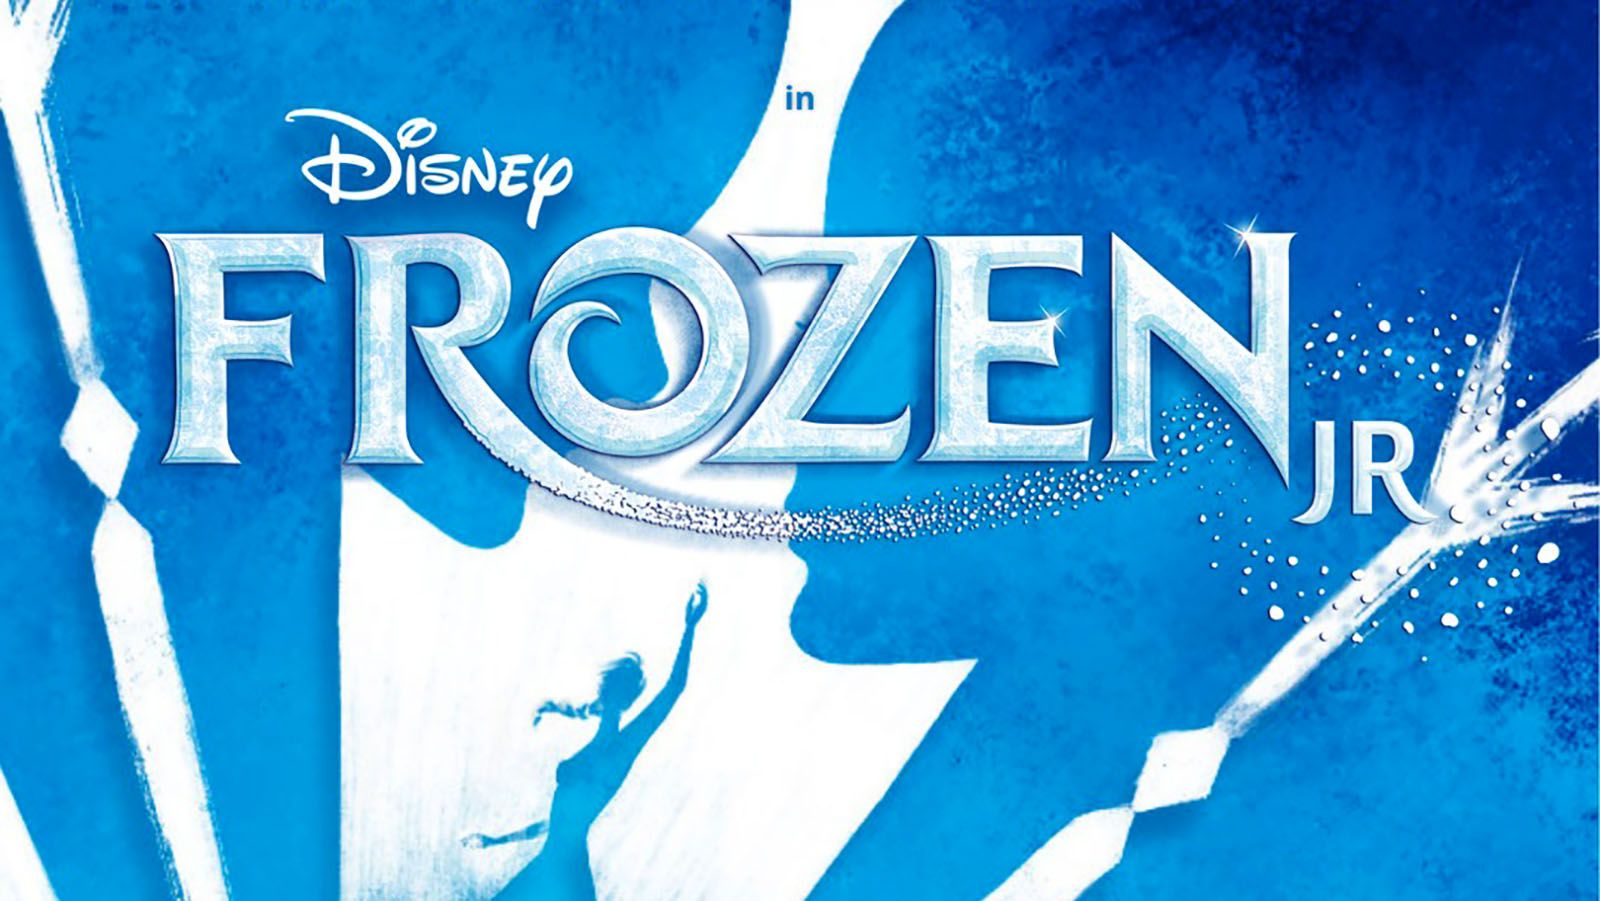 Fort Wayne Youtheatre is putting on "Frozen Jr." at First Presbyterian Theater.